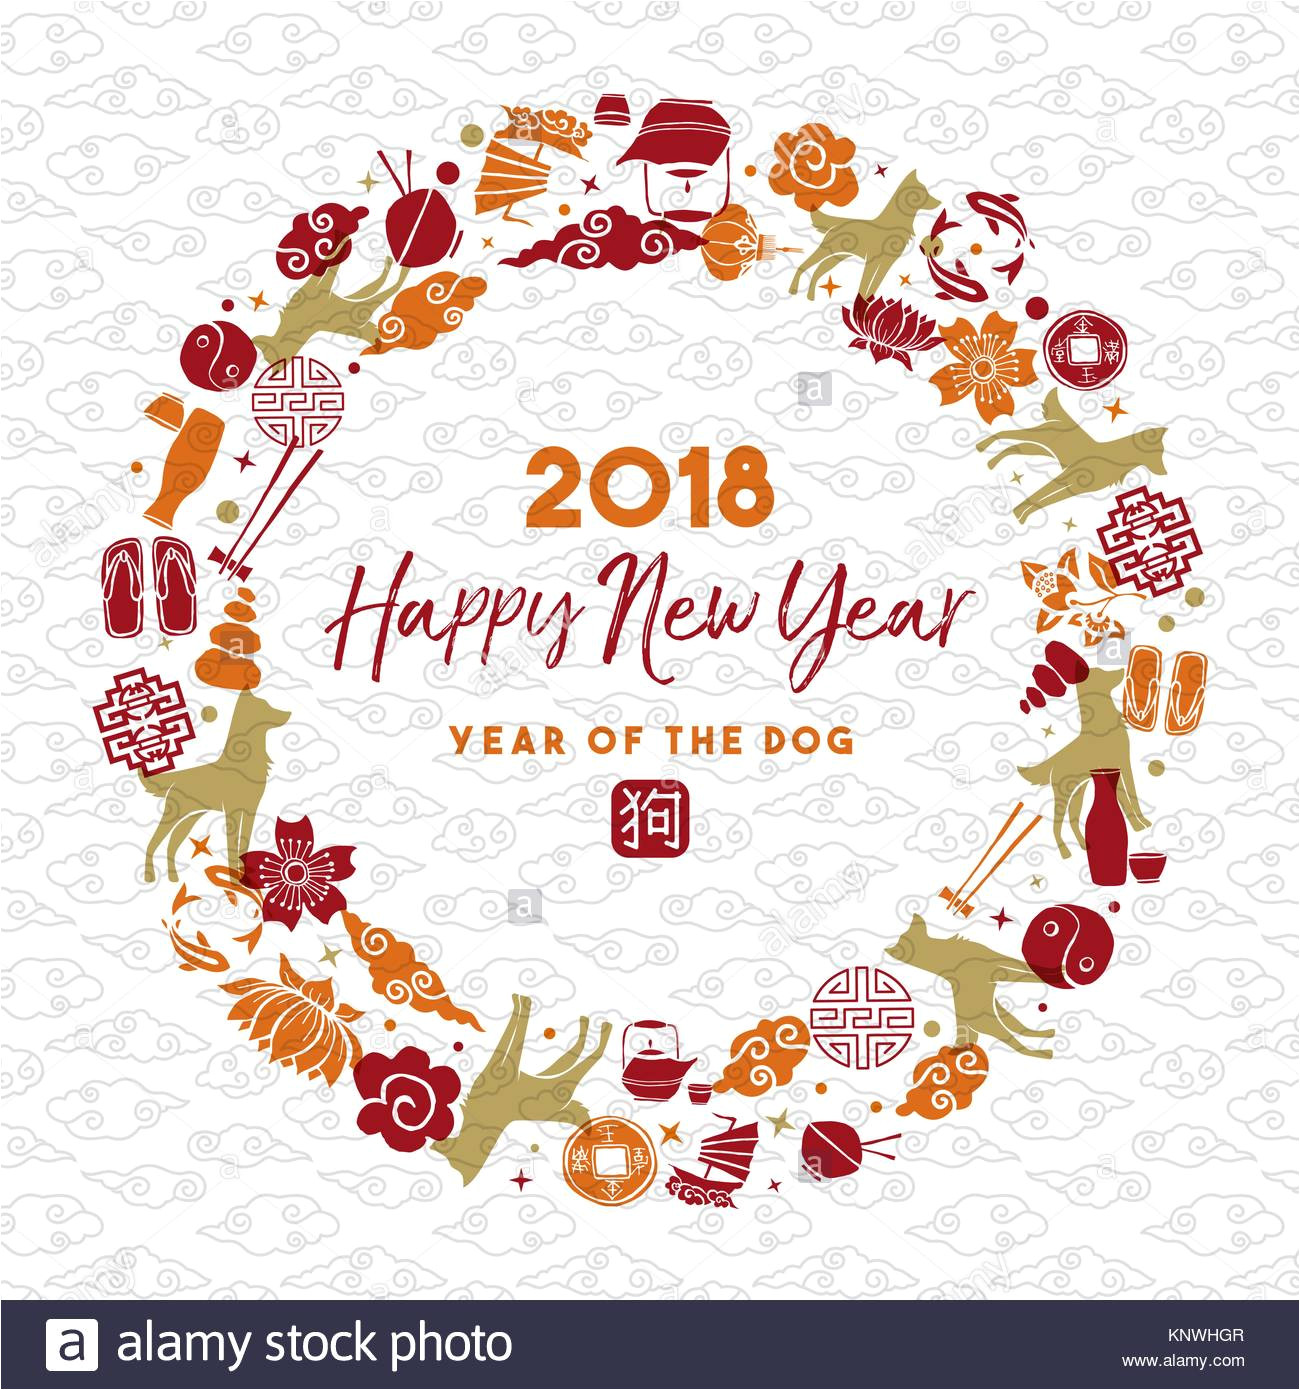 happy chinese new year of the dog 2018 greeting card illustration knwhgr jpg